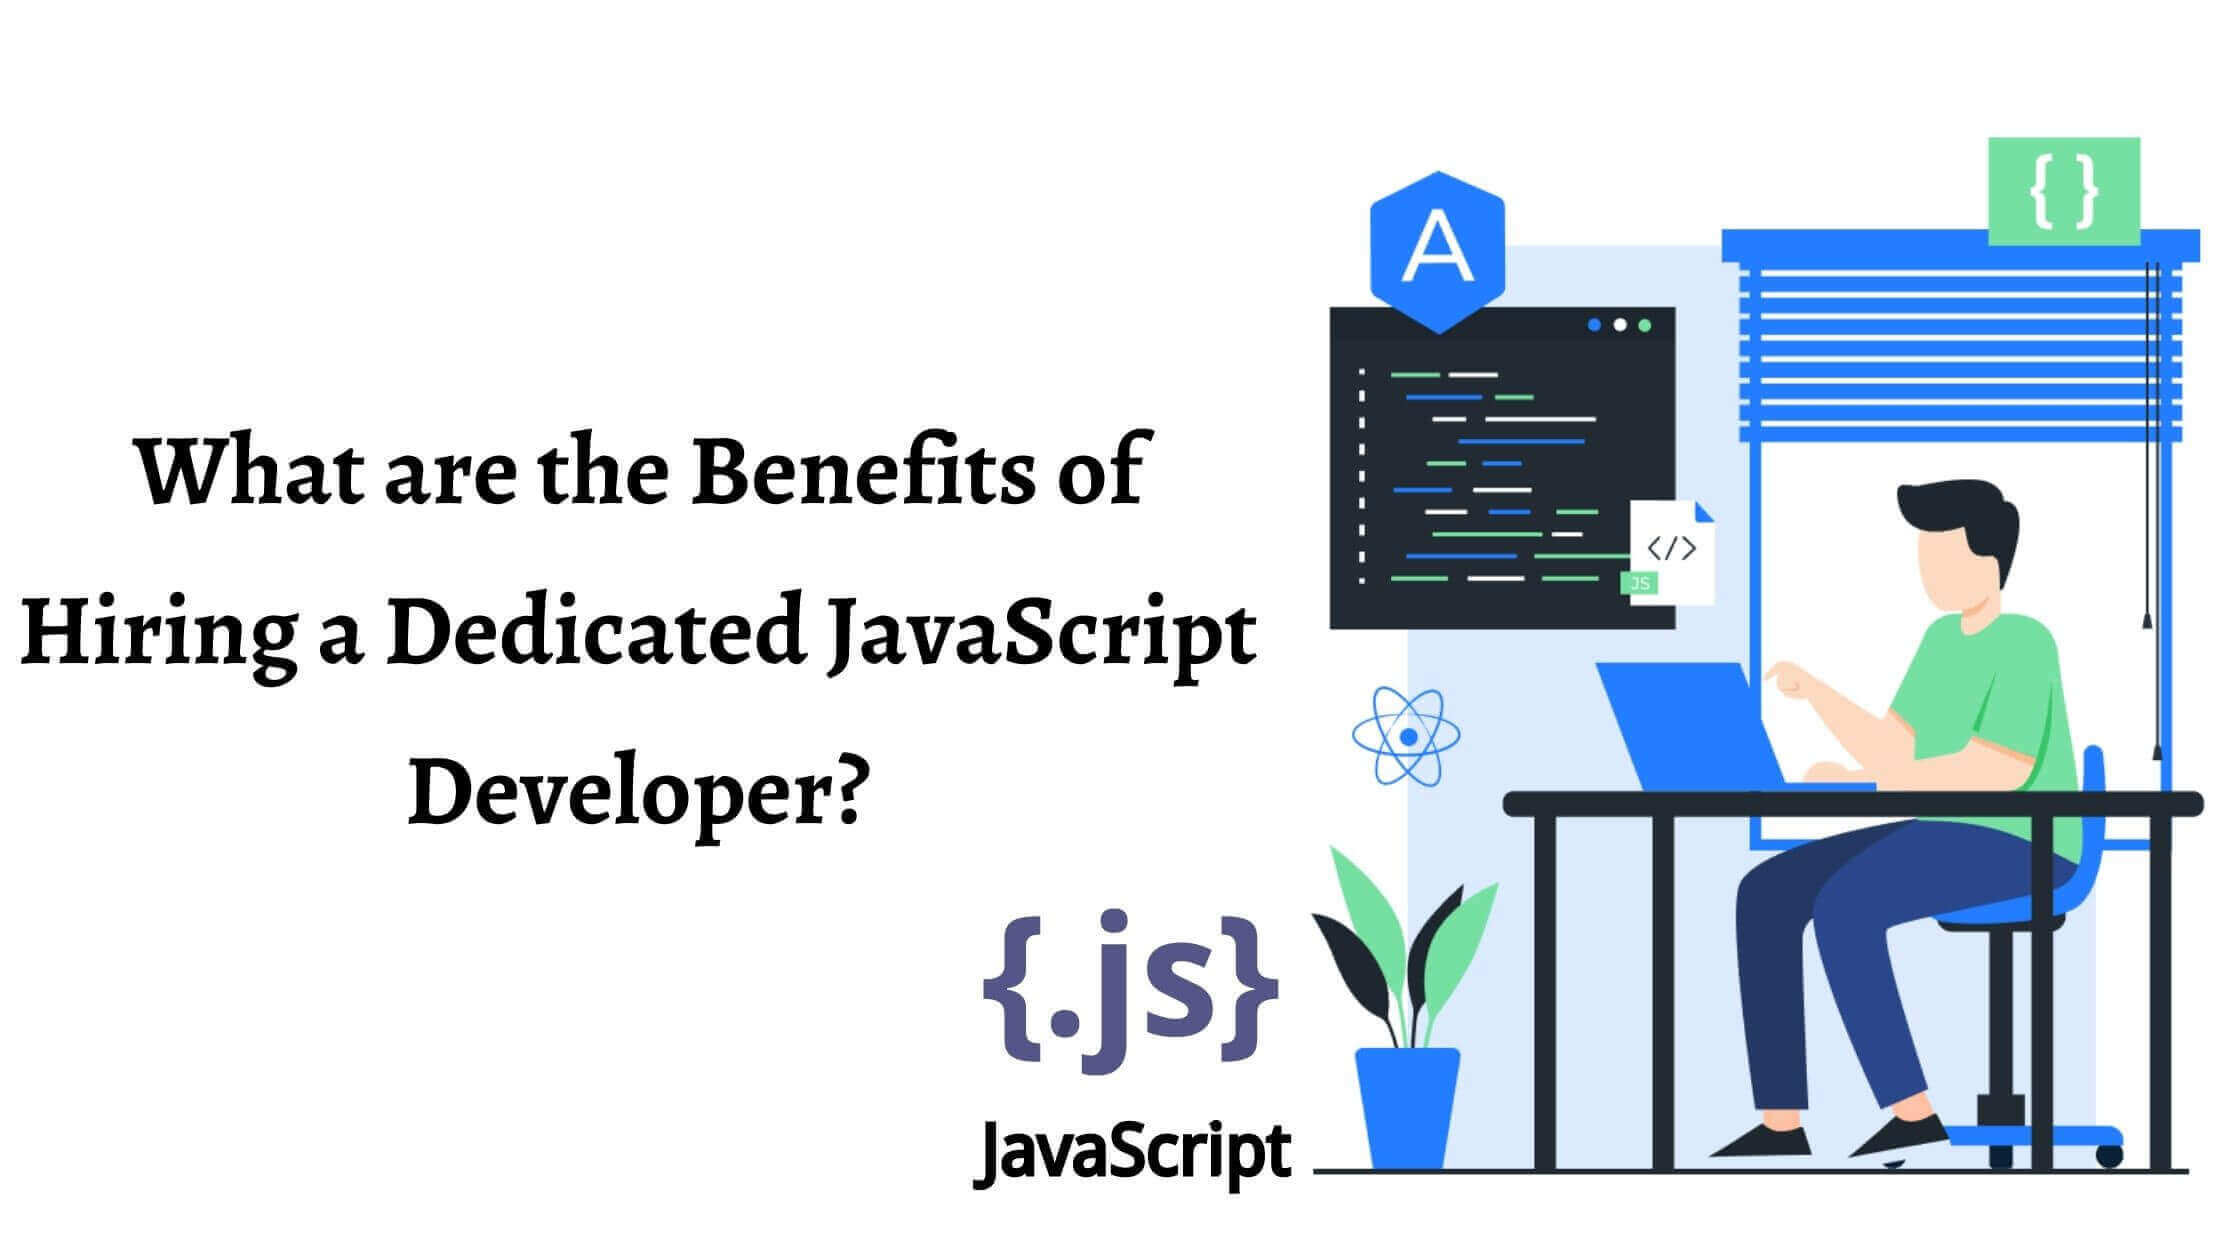 What are the Benefits of Hiring a Dedicated JavaScript Develope